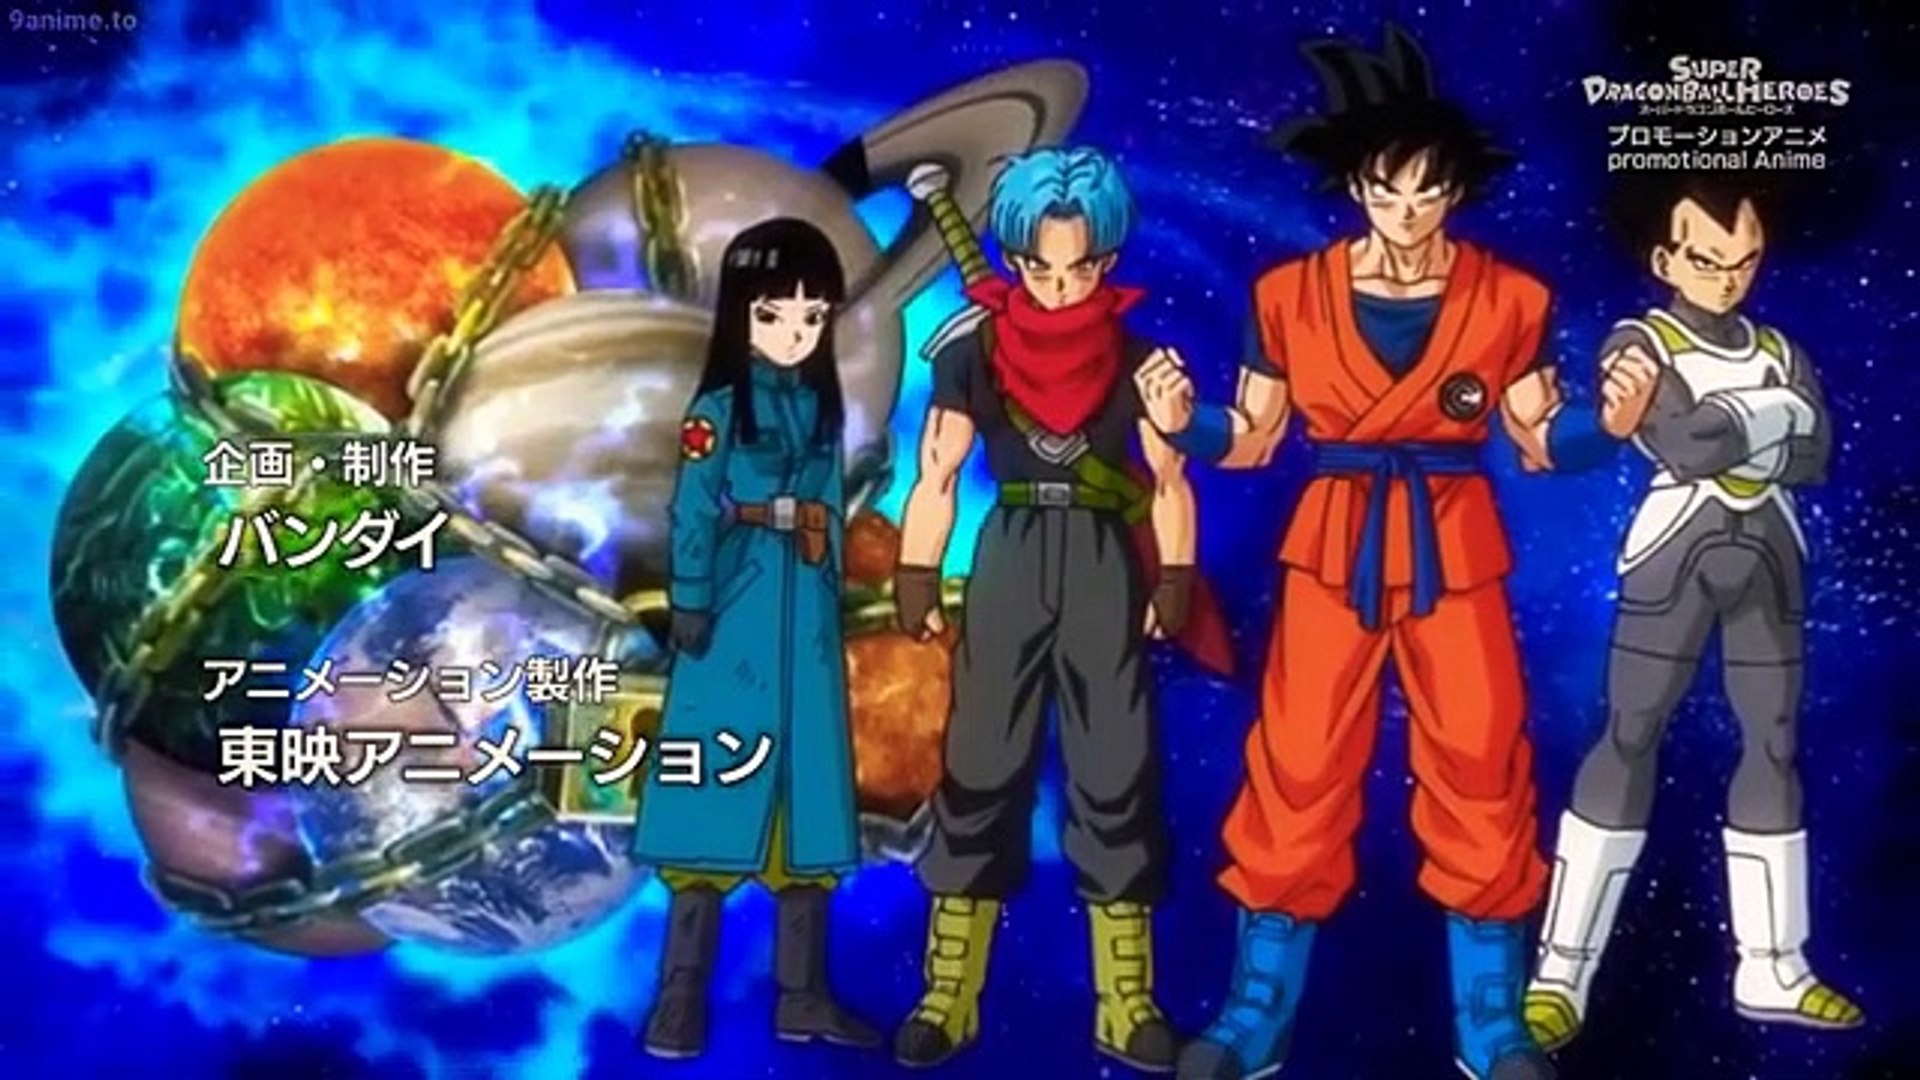 amber temple hughes recommends Dragon Ball Super Ep2